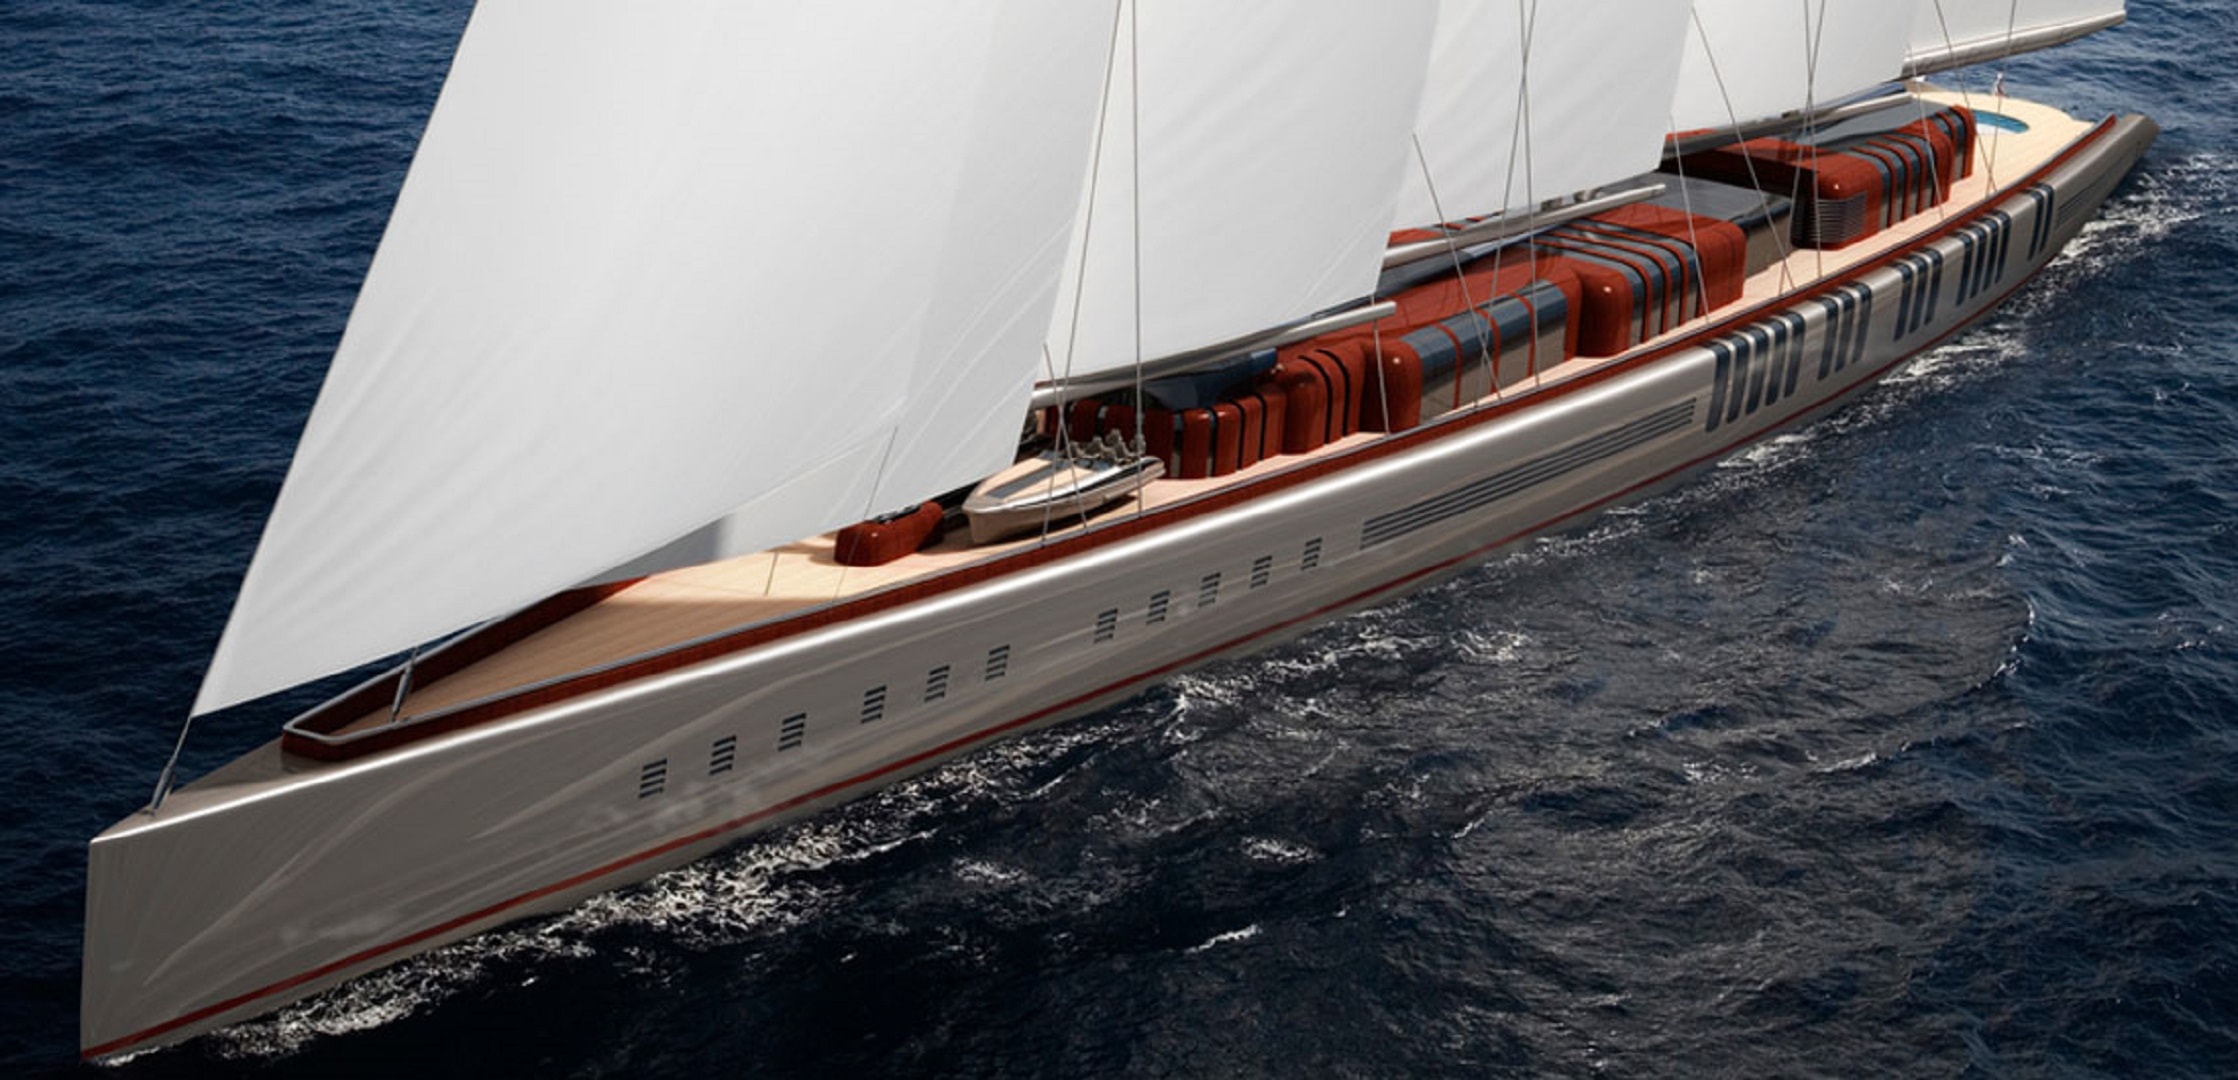 Dream Symphony Wants to Become the World's Largest Sailing Yacht